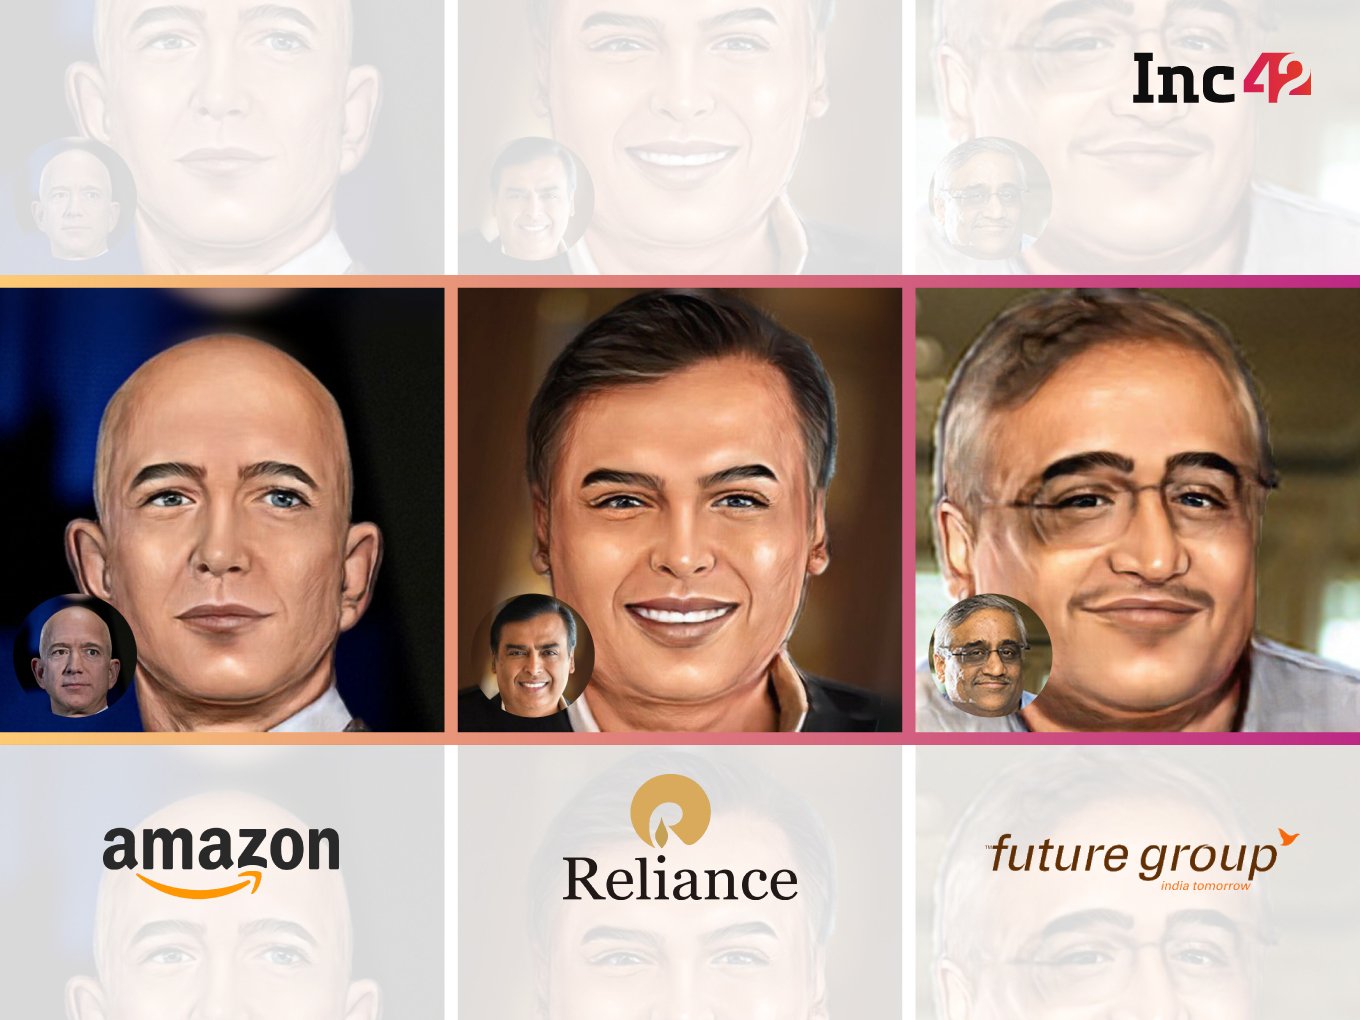 Amazon Vs Future Feat. Reliance: Everything You Need To Know Explained In 6 Points